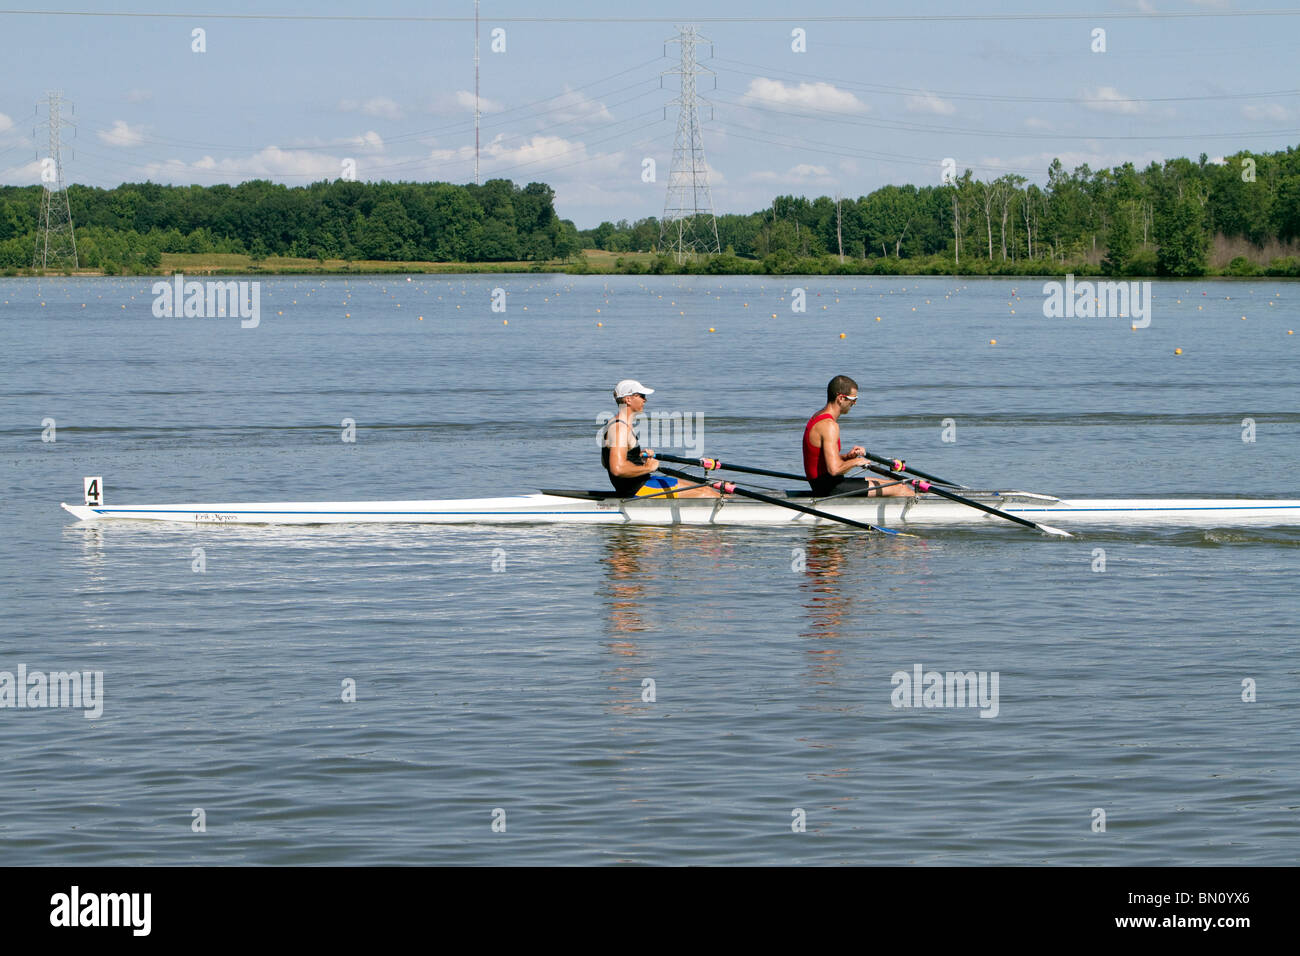 Two man racing shell boat with crew rowing Stock Photo